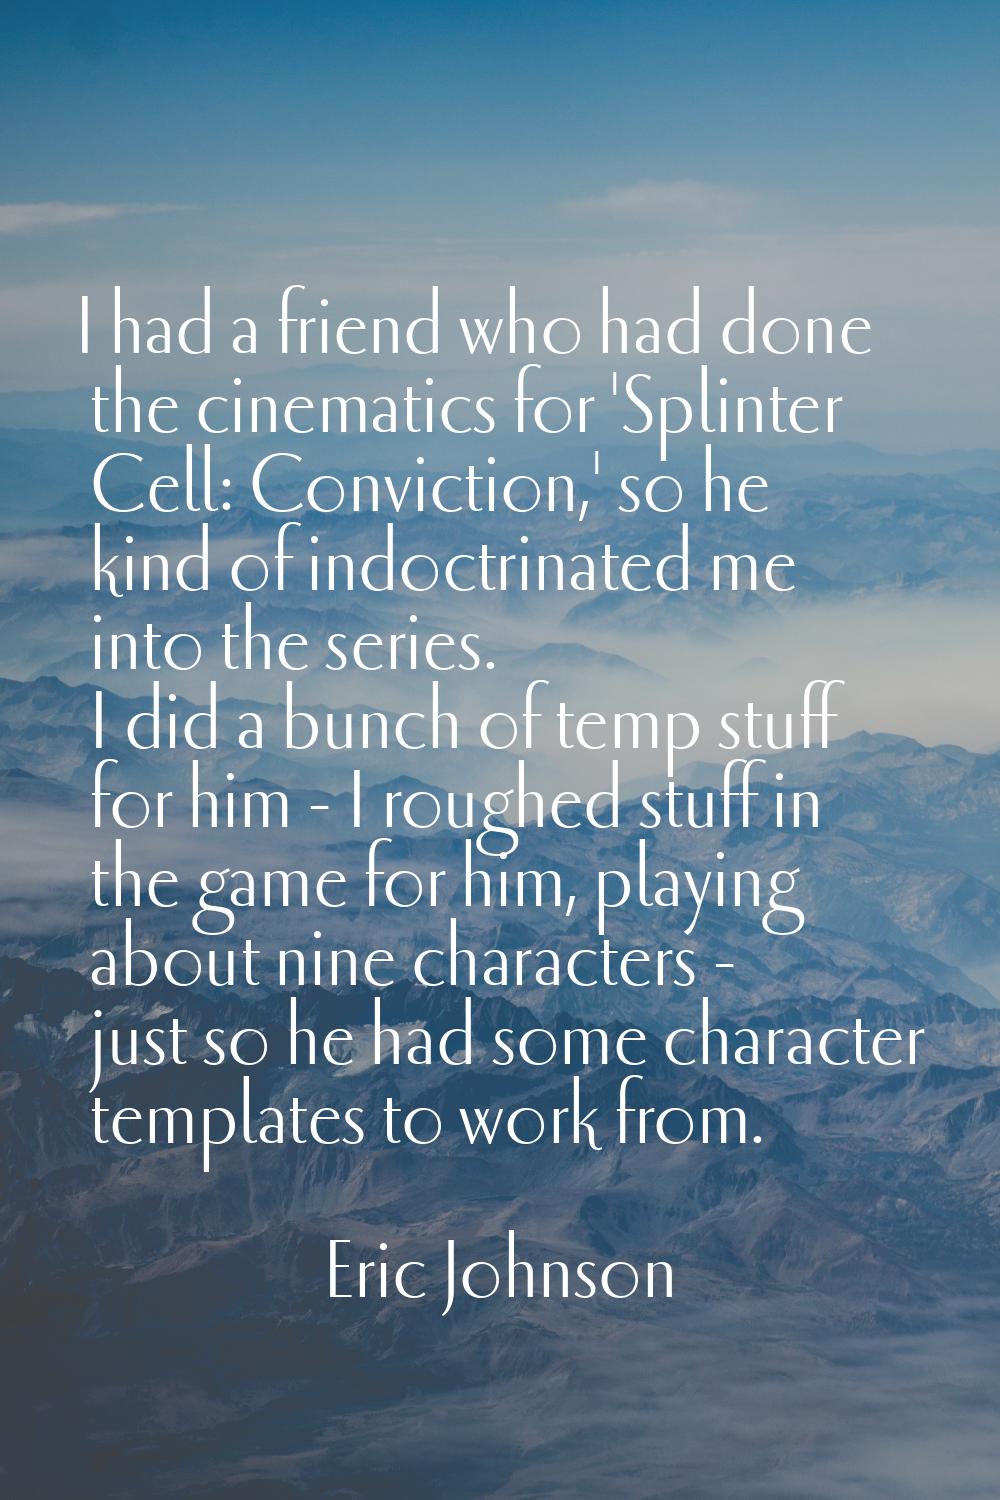 I had a friend who had done the cinematics for 'Splinter Cell: Conviction,' so he kind of indoctrin